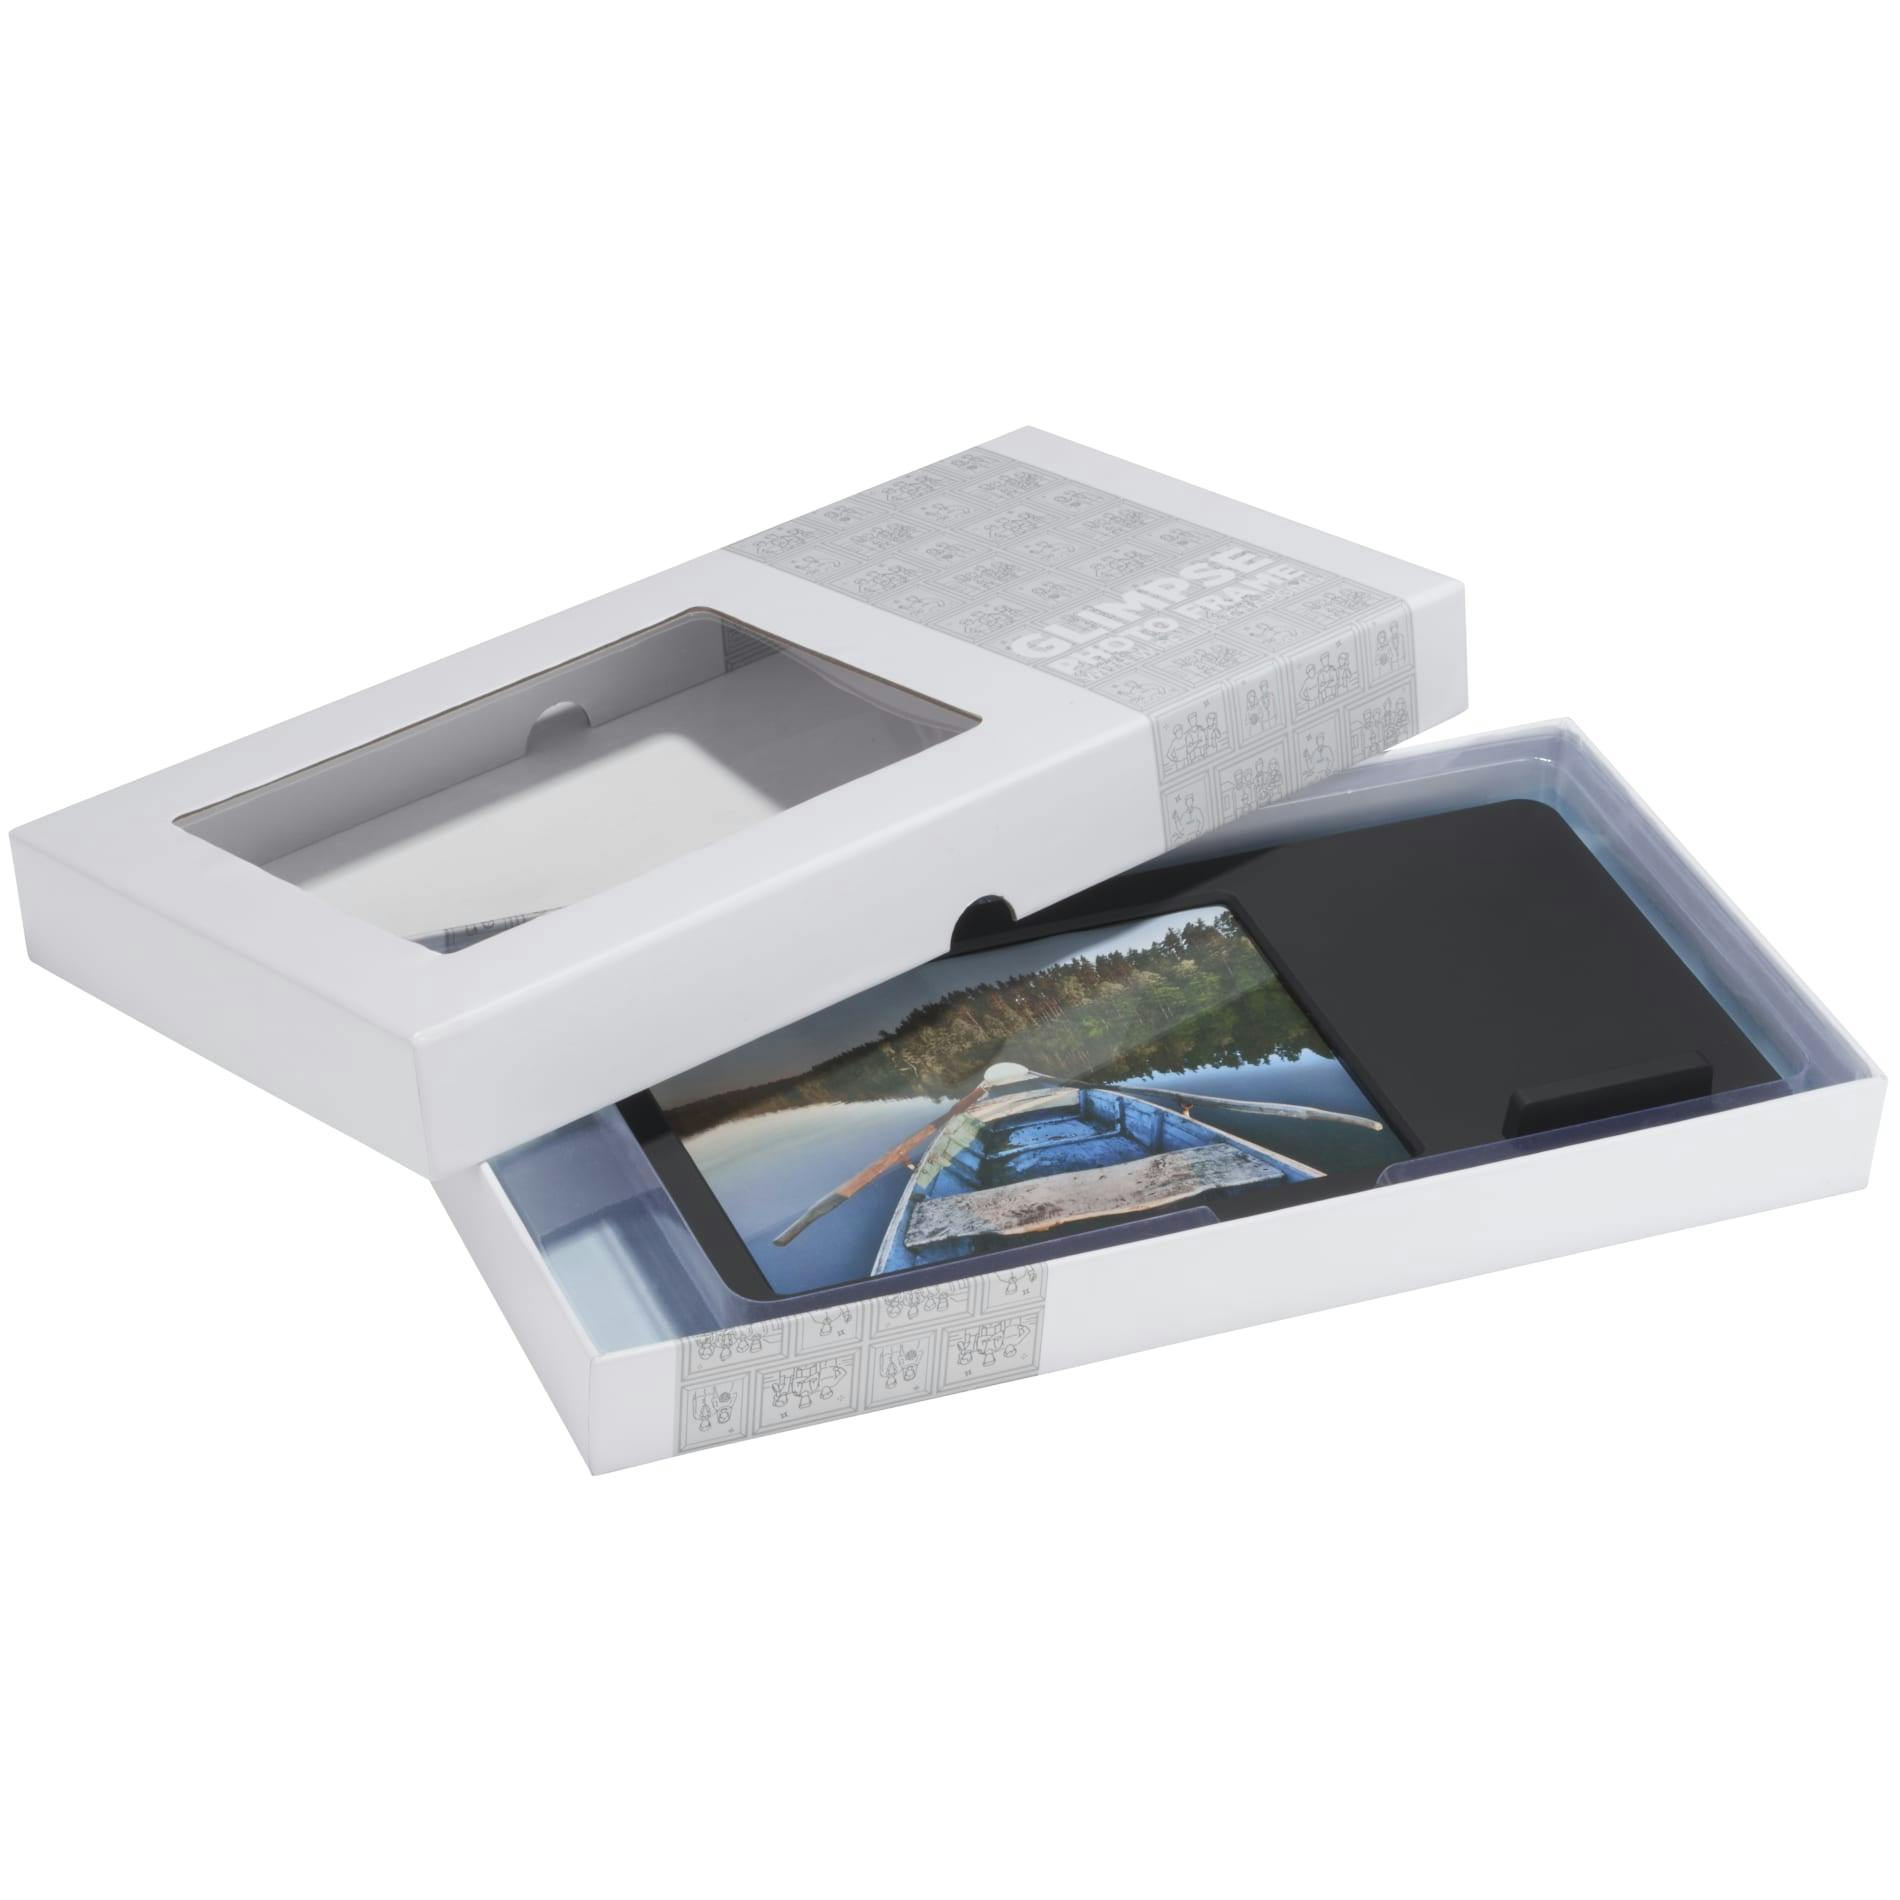 Glimpse Photo Frame with Wireless Charging Pad - additional Image 5